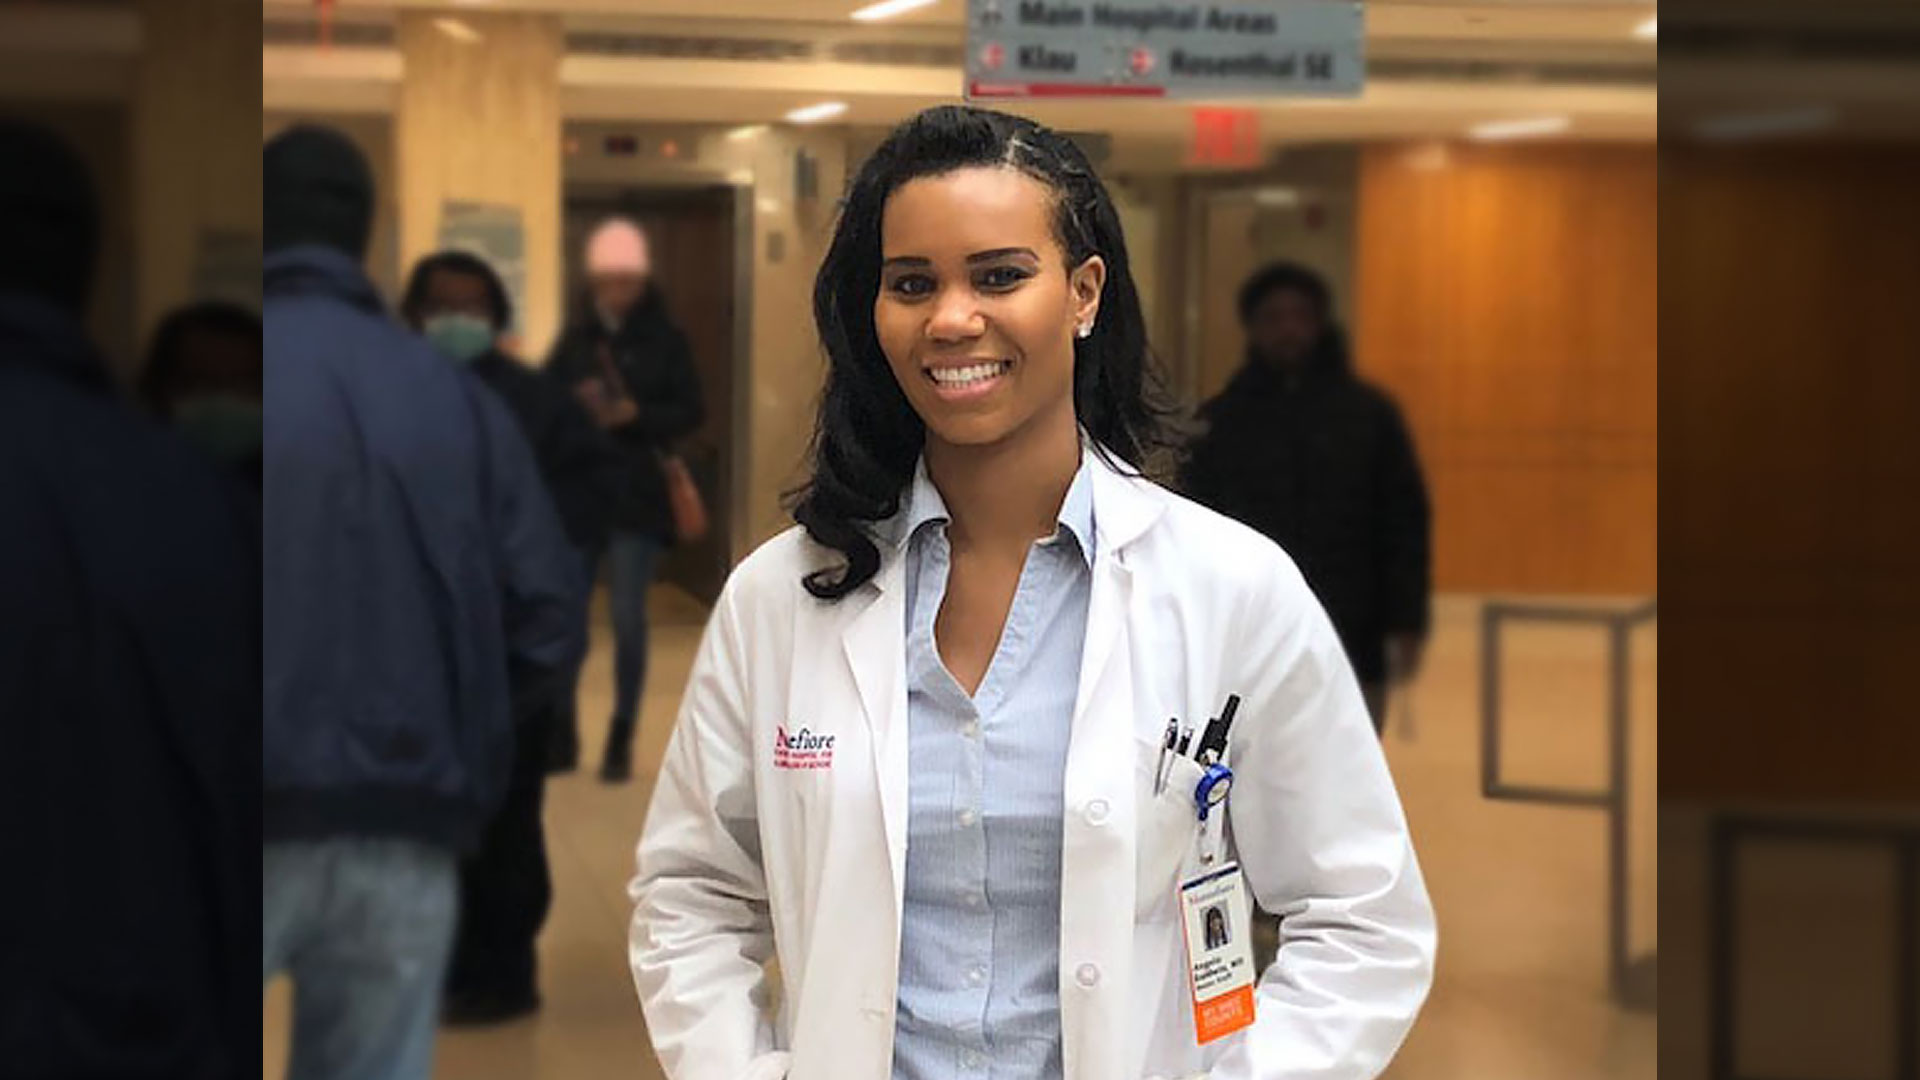 Charting Her Own Course: From Navy Flight Surgeon to First-Year Pathology Resident